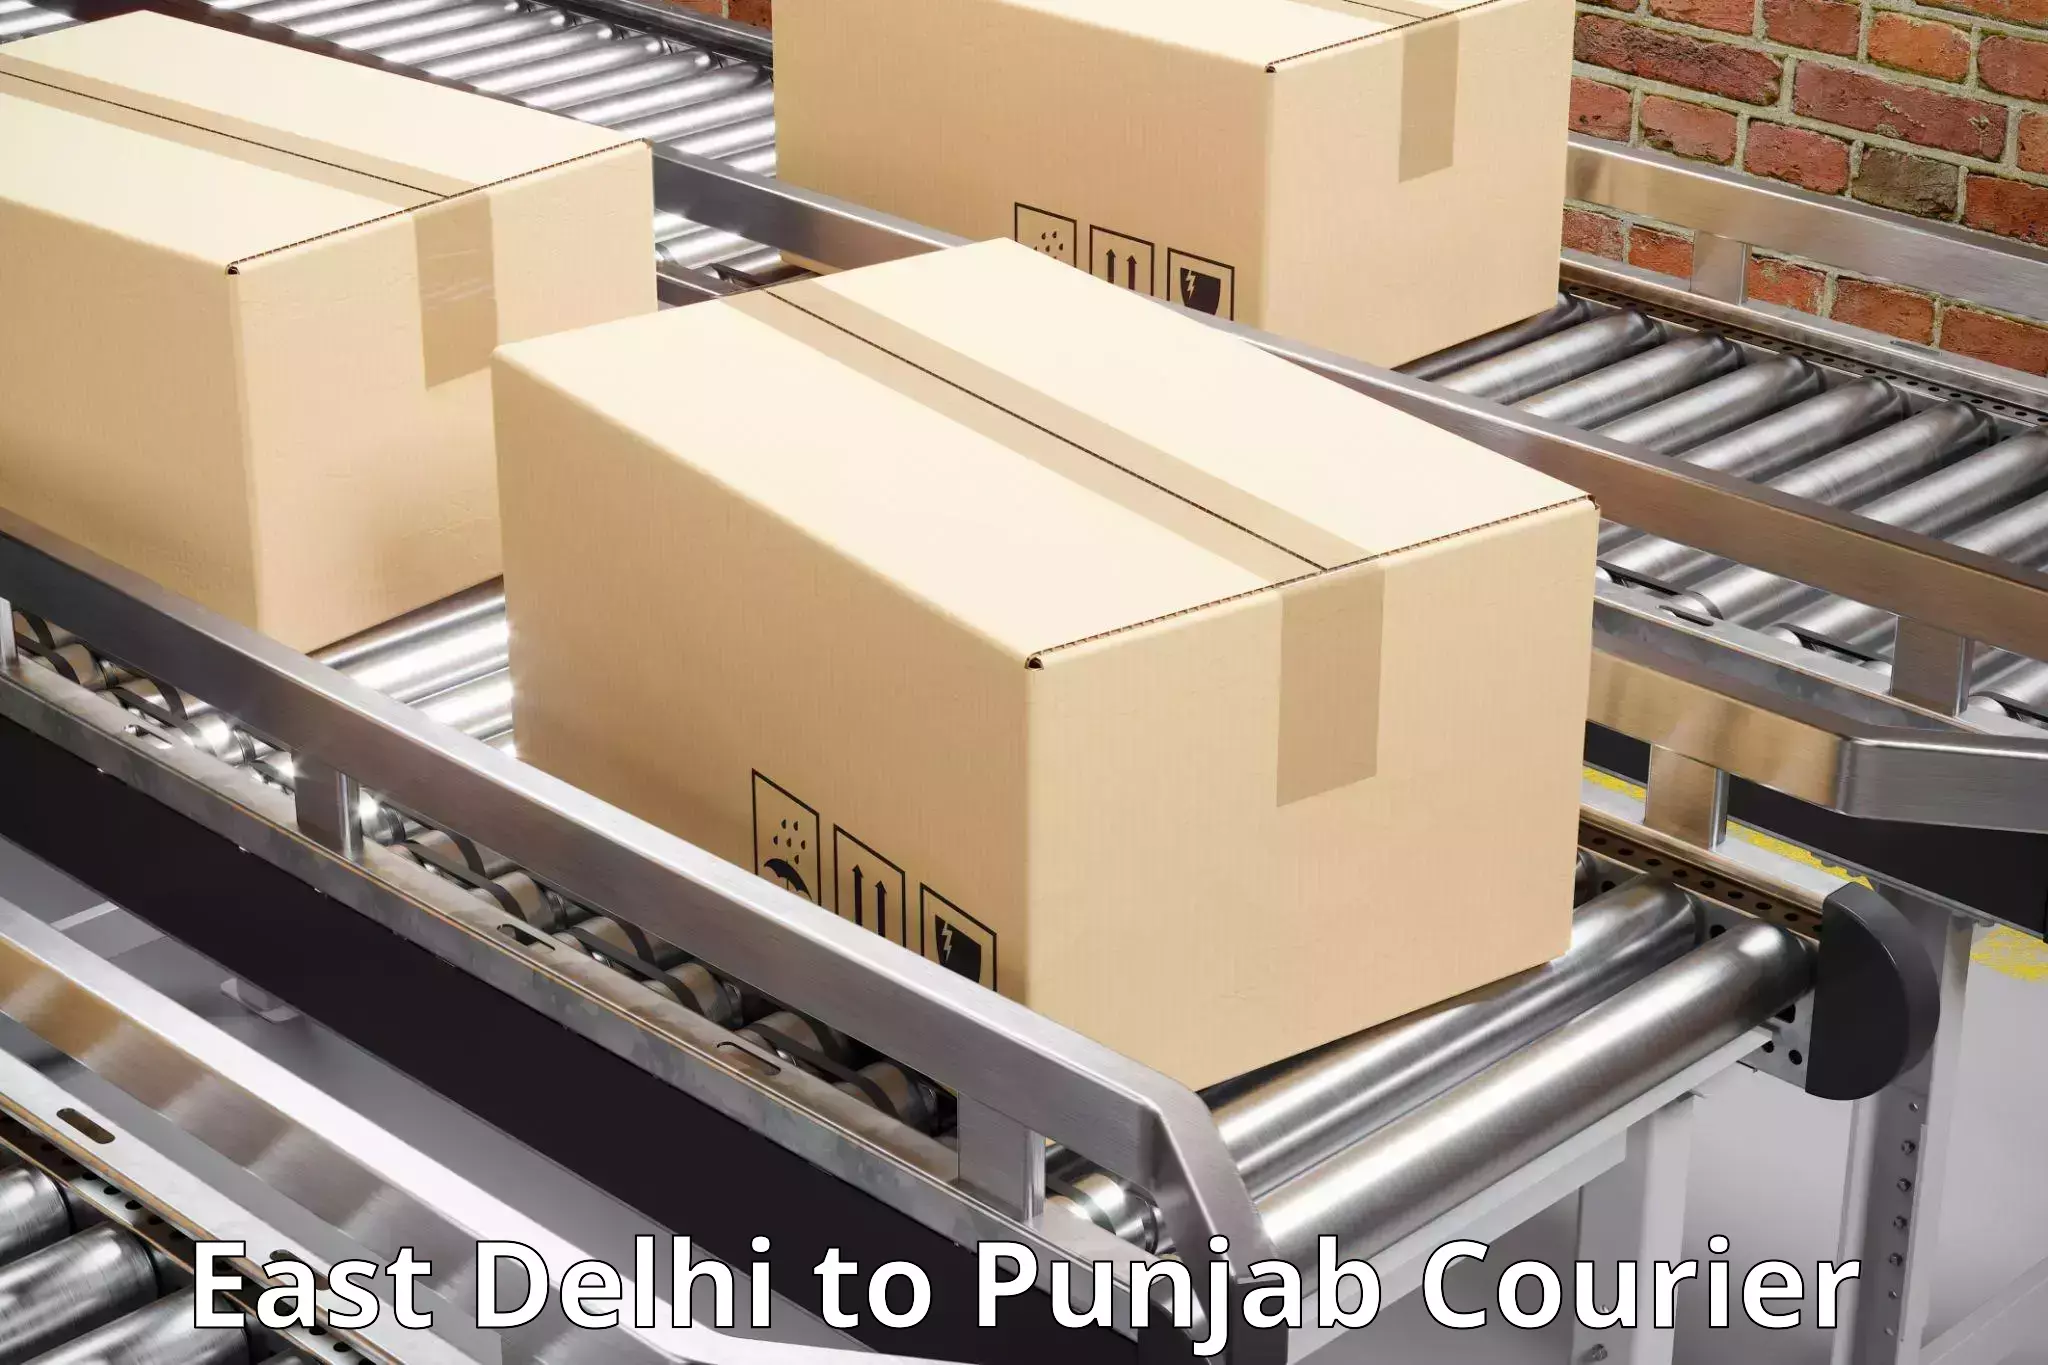 Express delivery solutions East Delhi to Amritsar